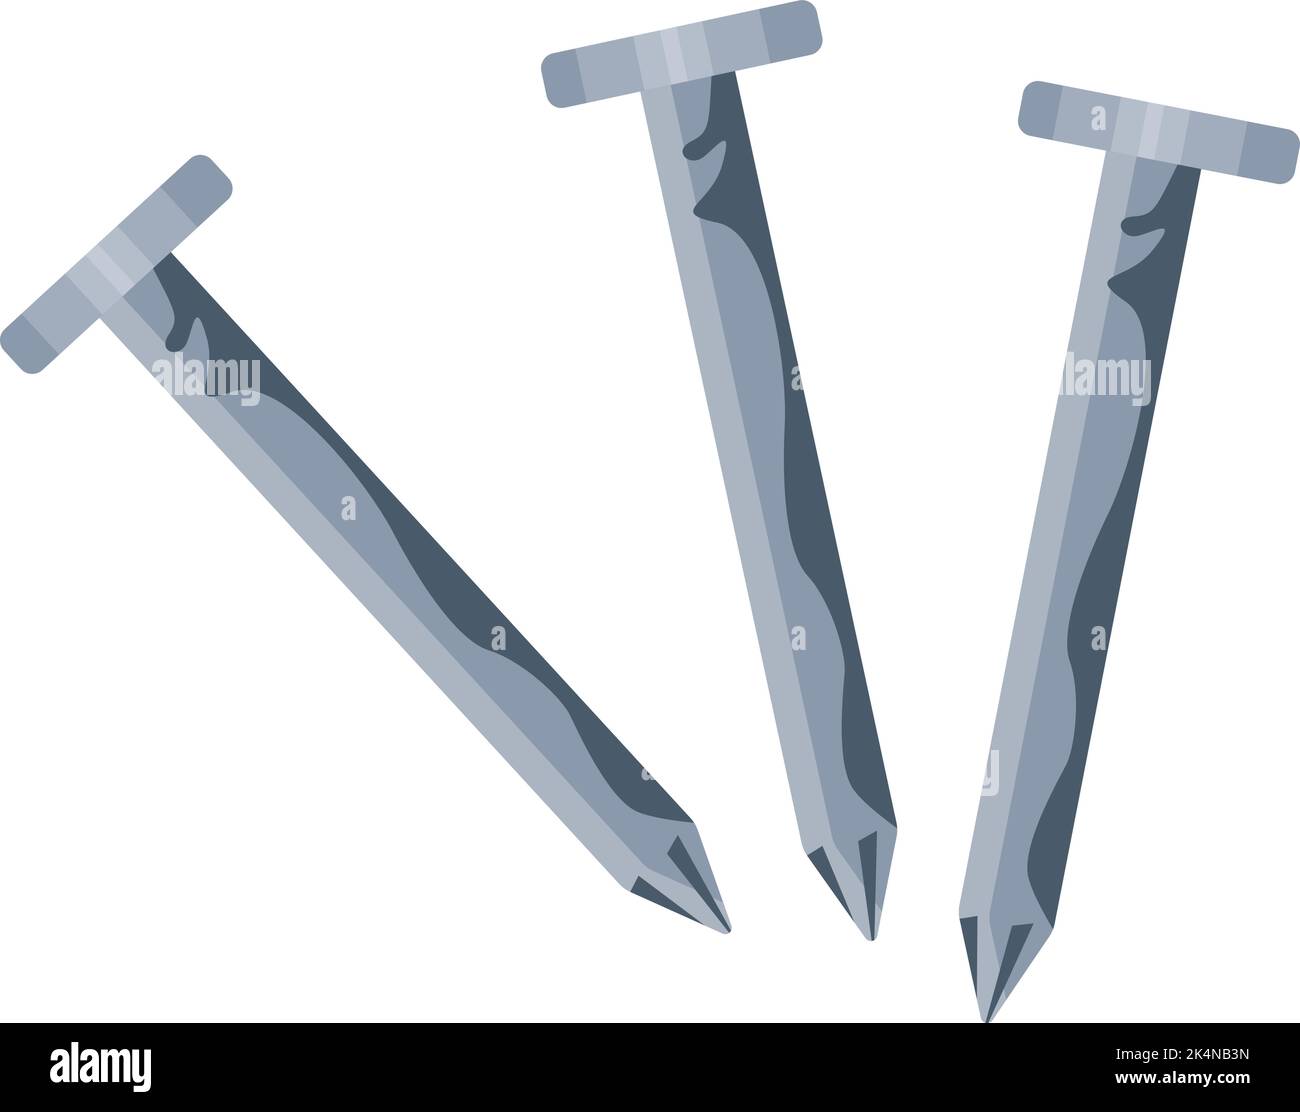 Three nails, illustration, vector on a white background. Stock Vector